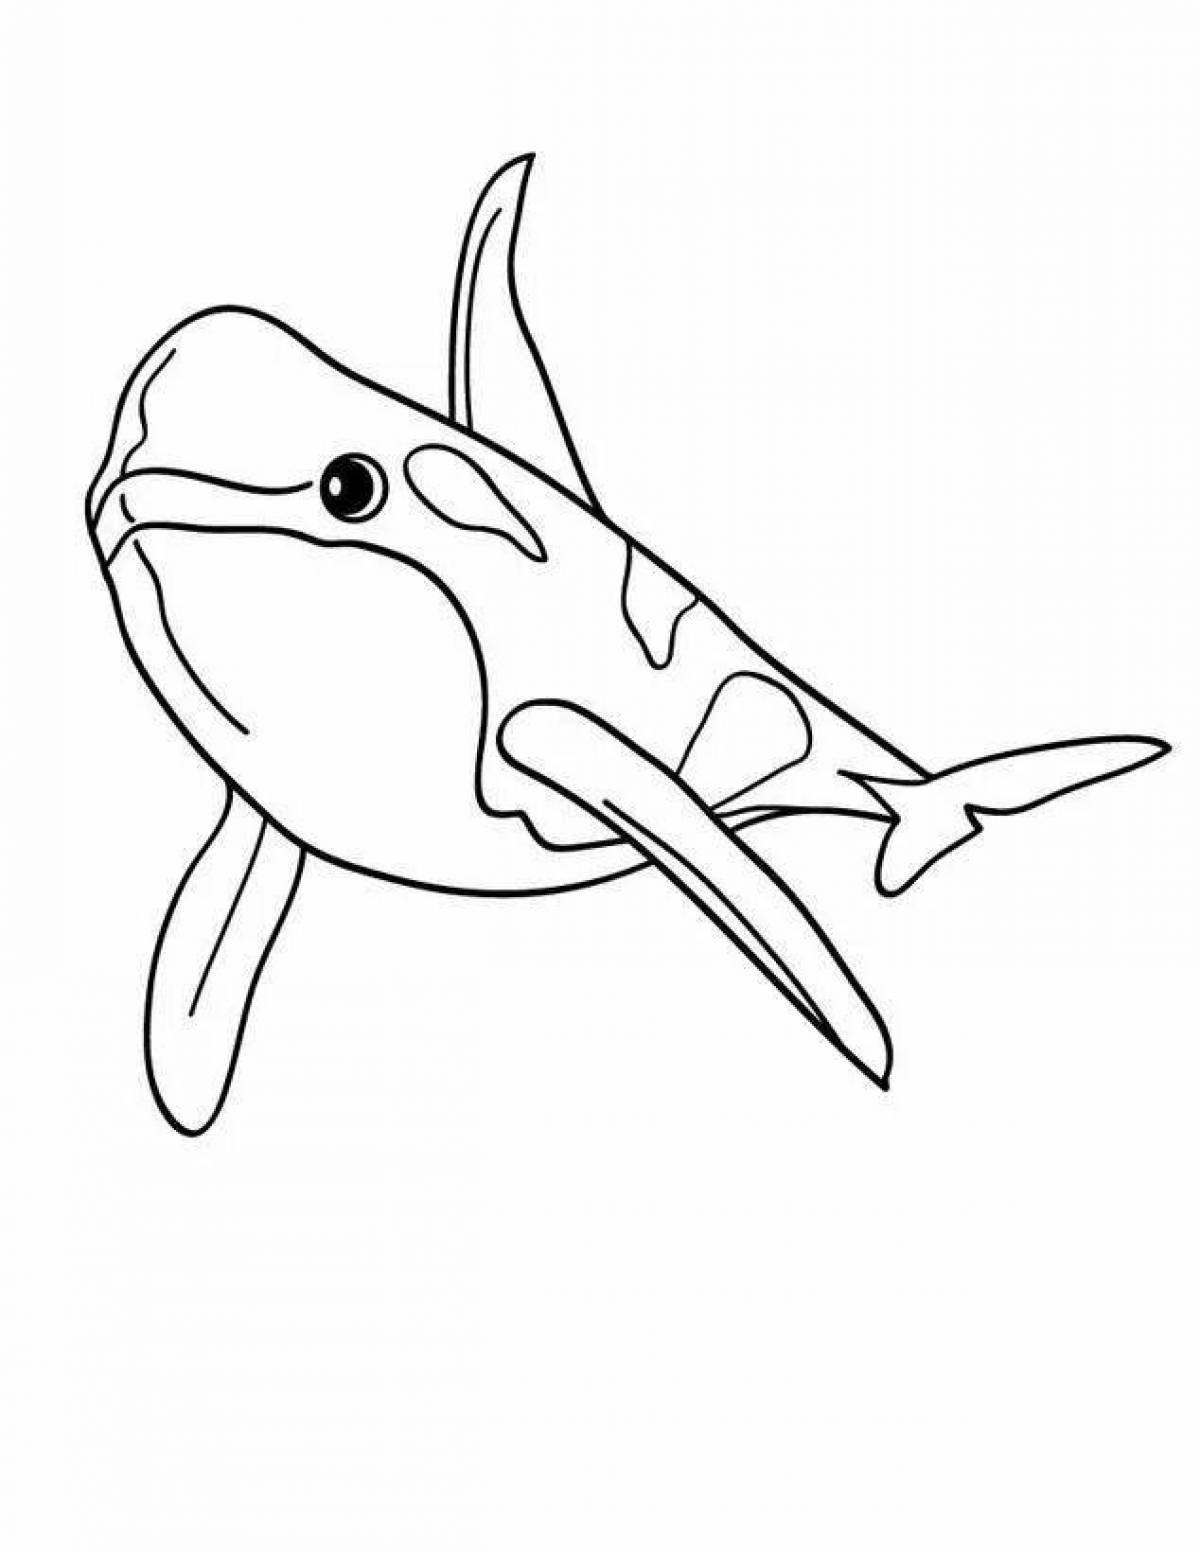 Exquisite killer whale coloring book for kids